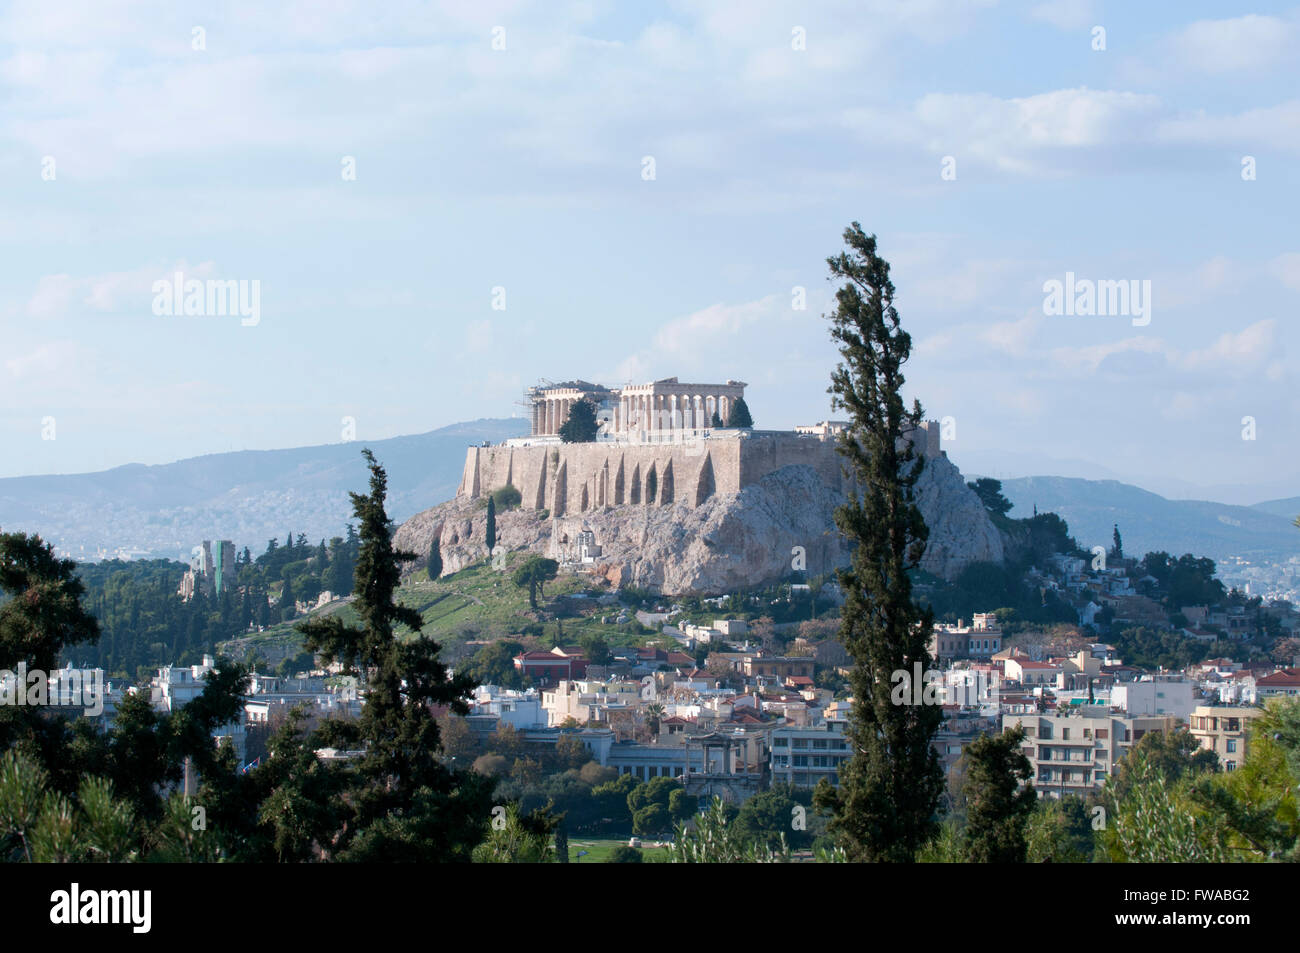 View of the Acropolis from Hill of Ardettos, Pangrati, Athens, Attica, Greece Stock Photo